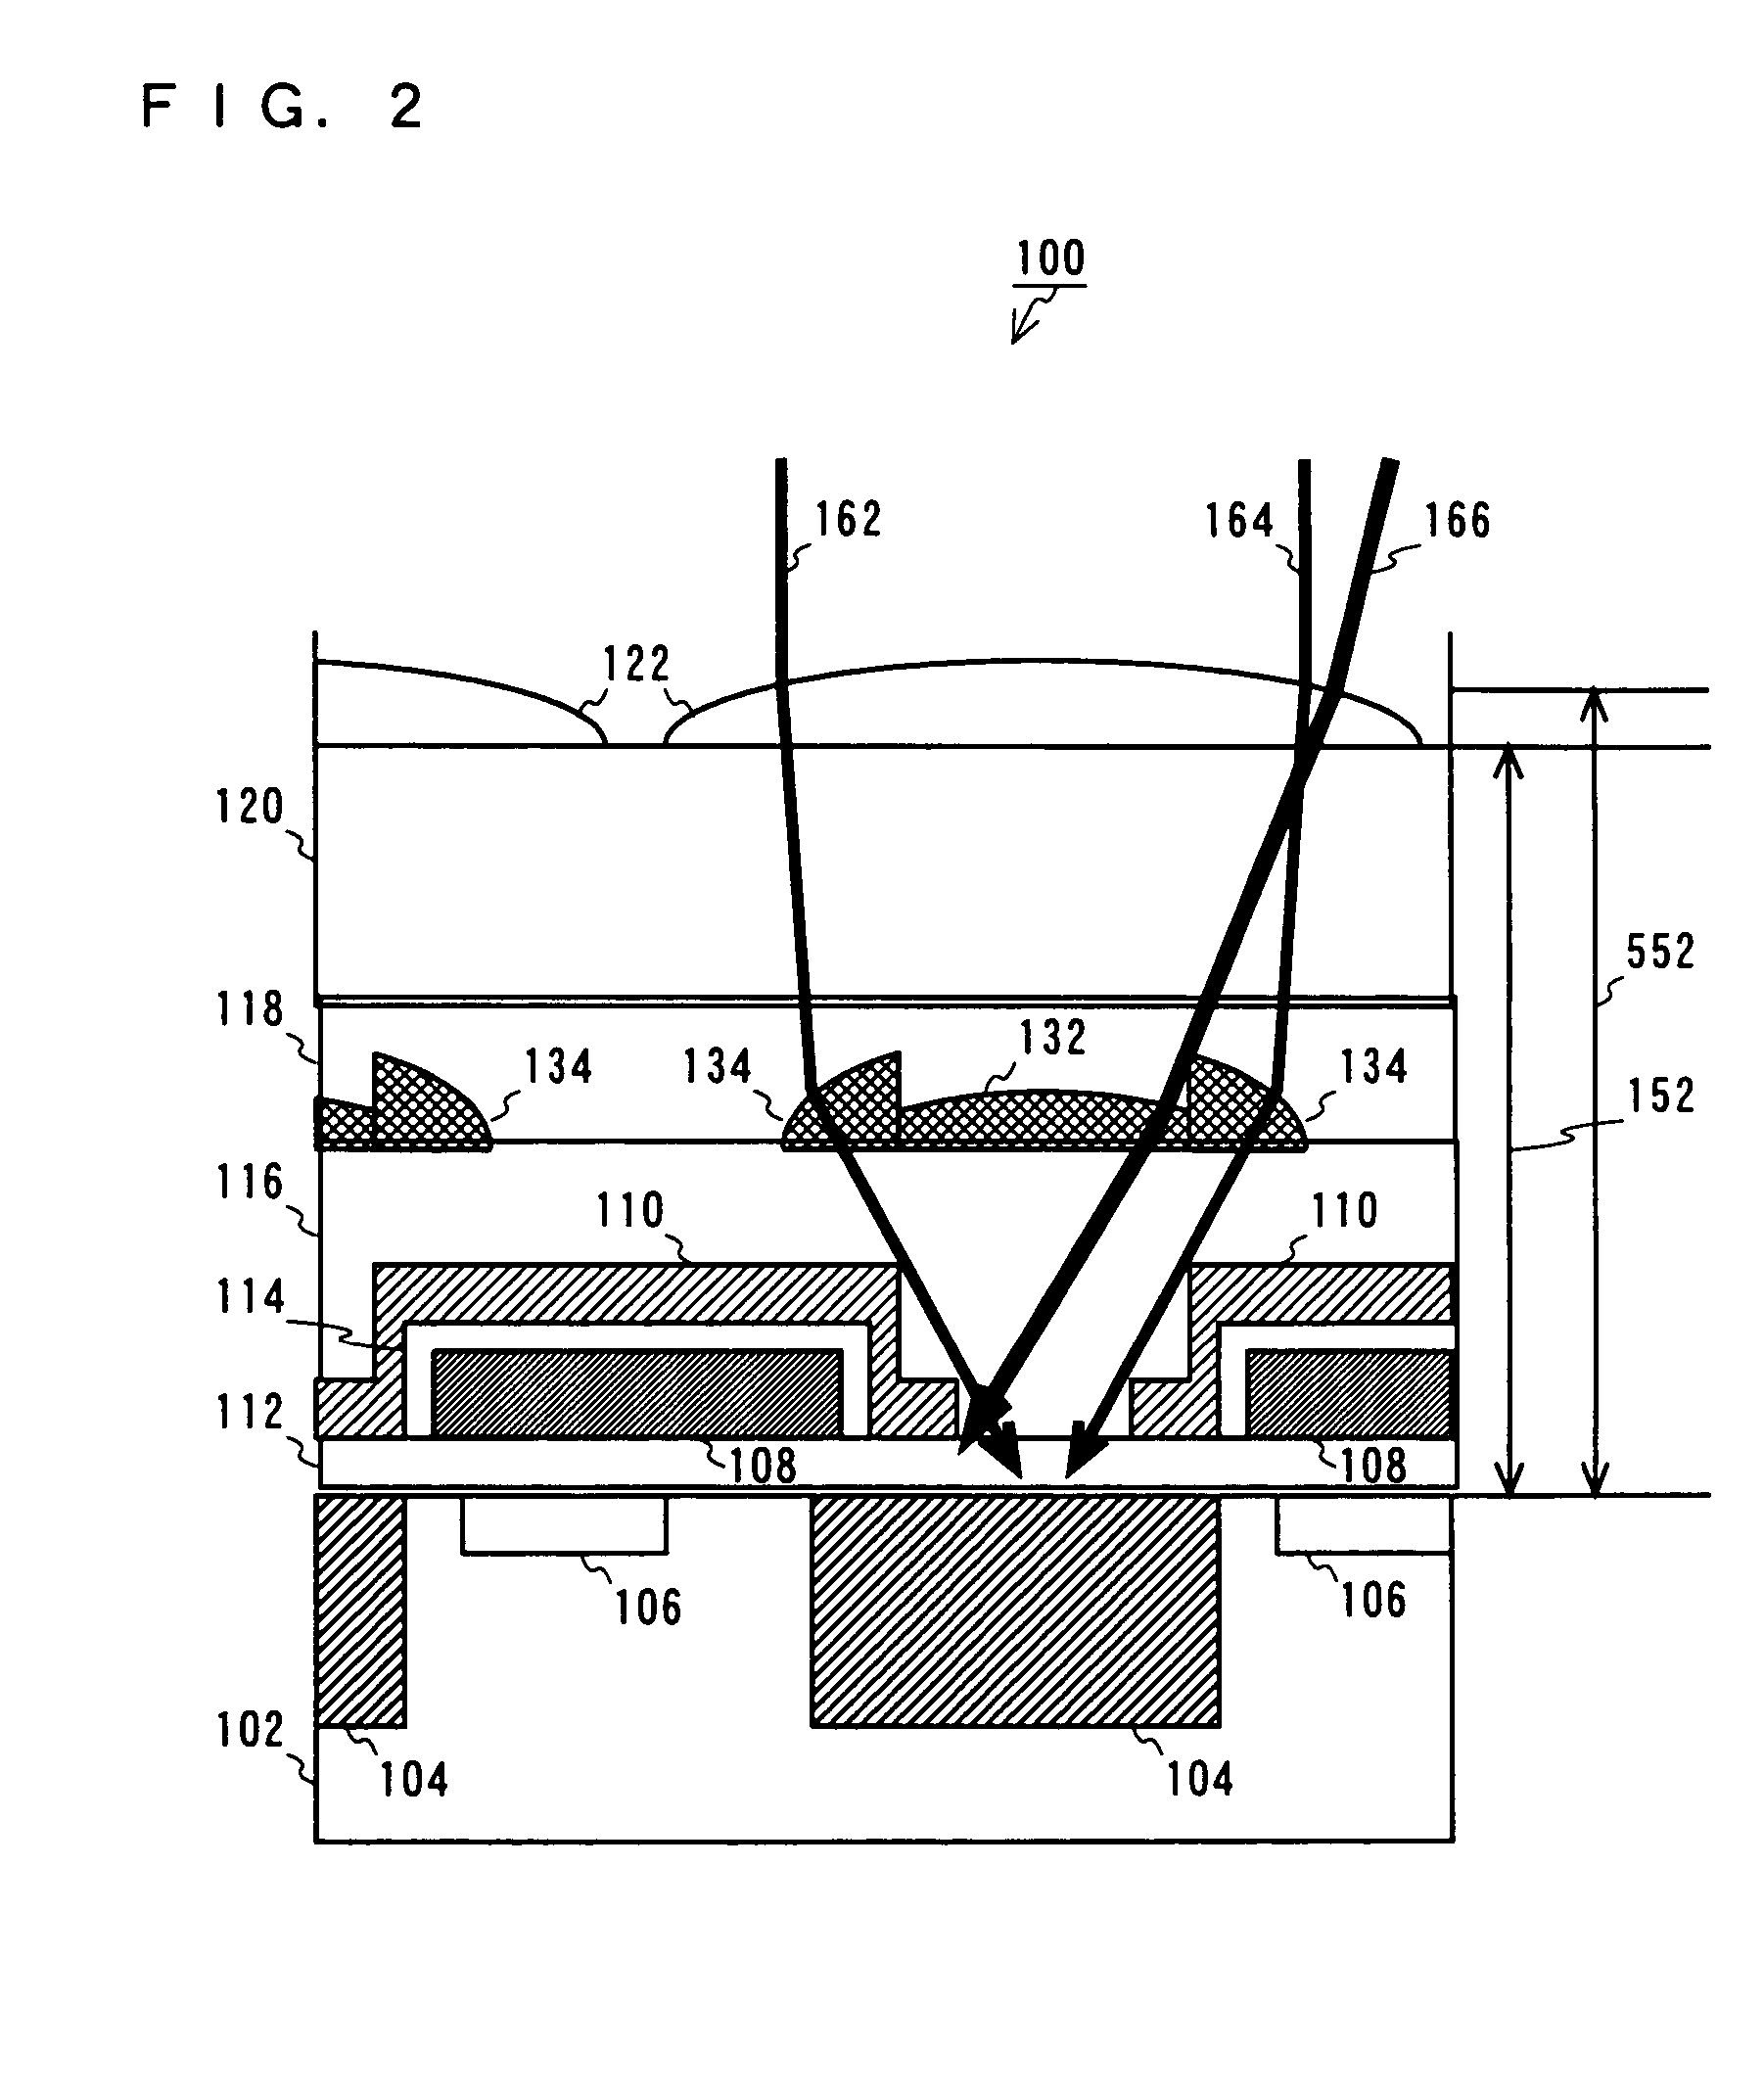 Solid state imaging device including annular and center lens in contact with each other